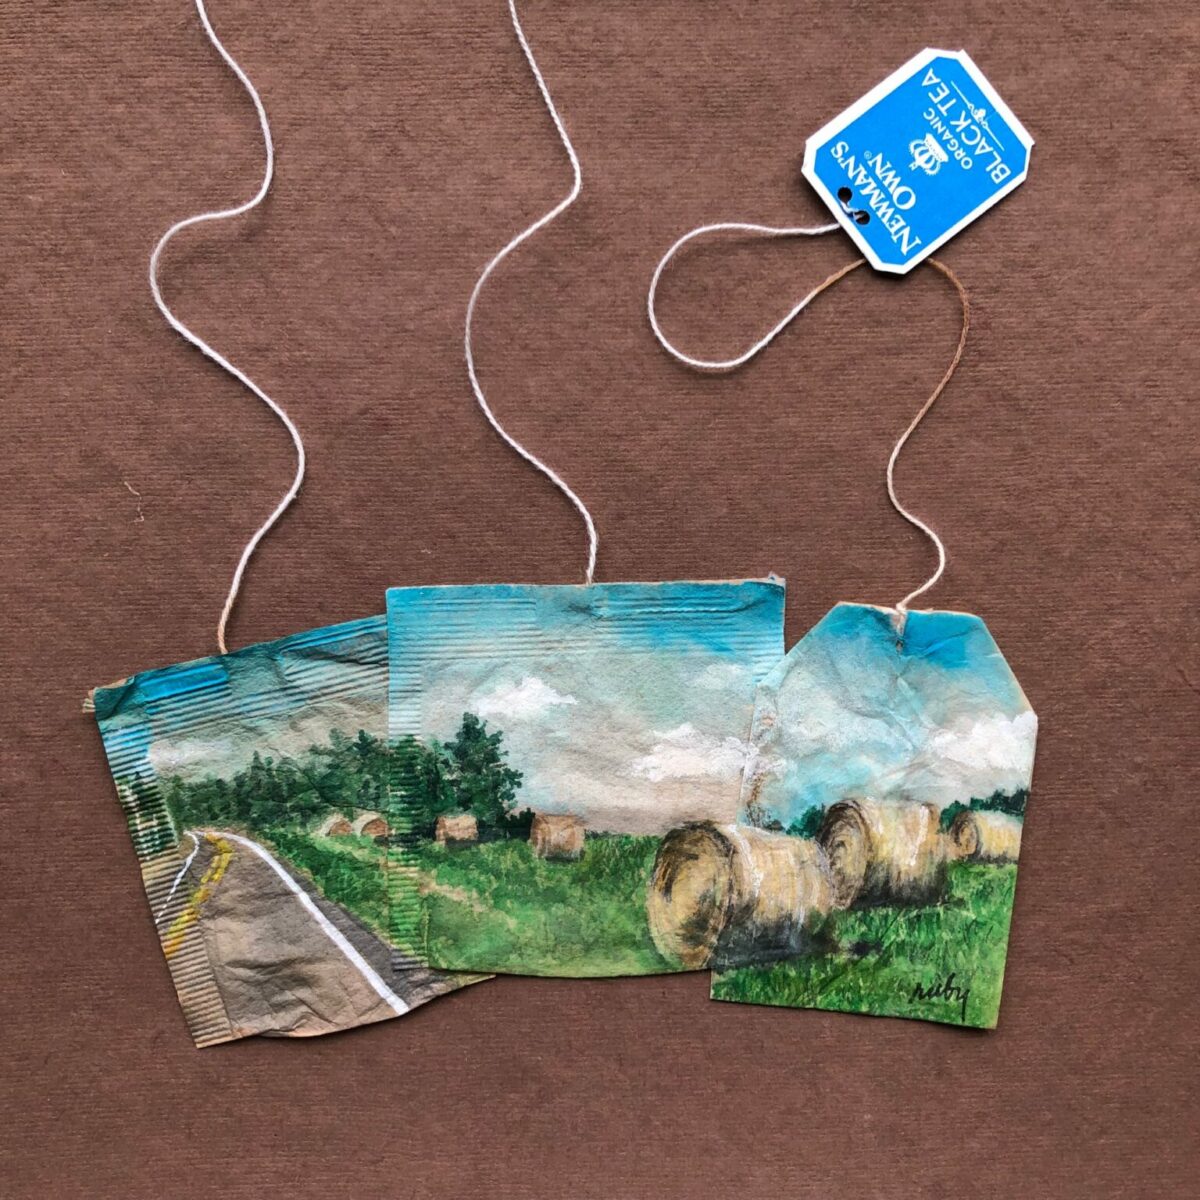 Gorgeous Miniature Watercolors Painted On Used Teabags By Ruby Silvious 13